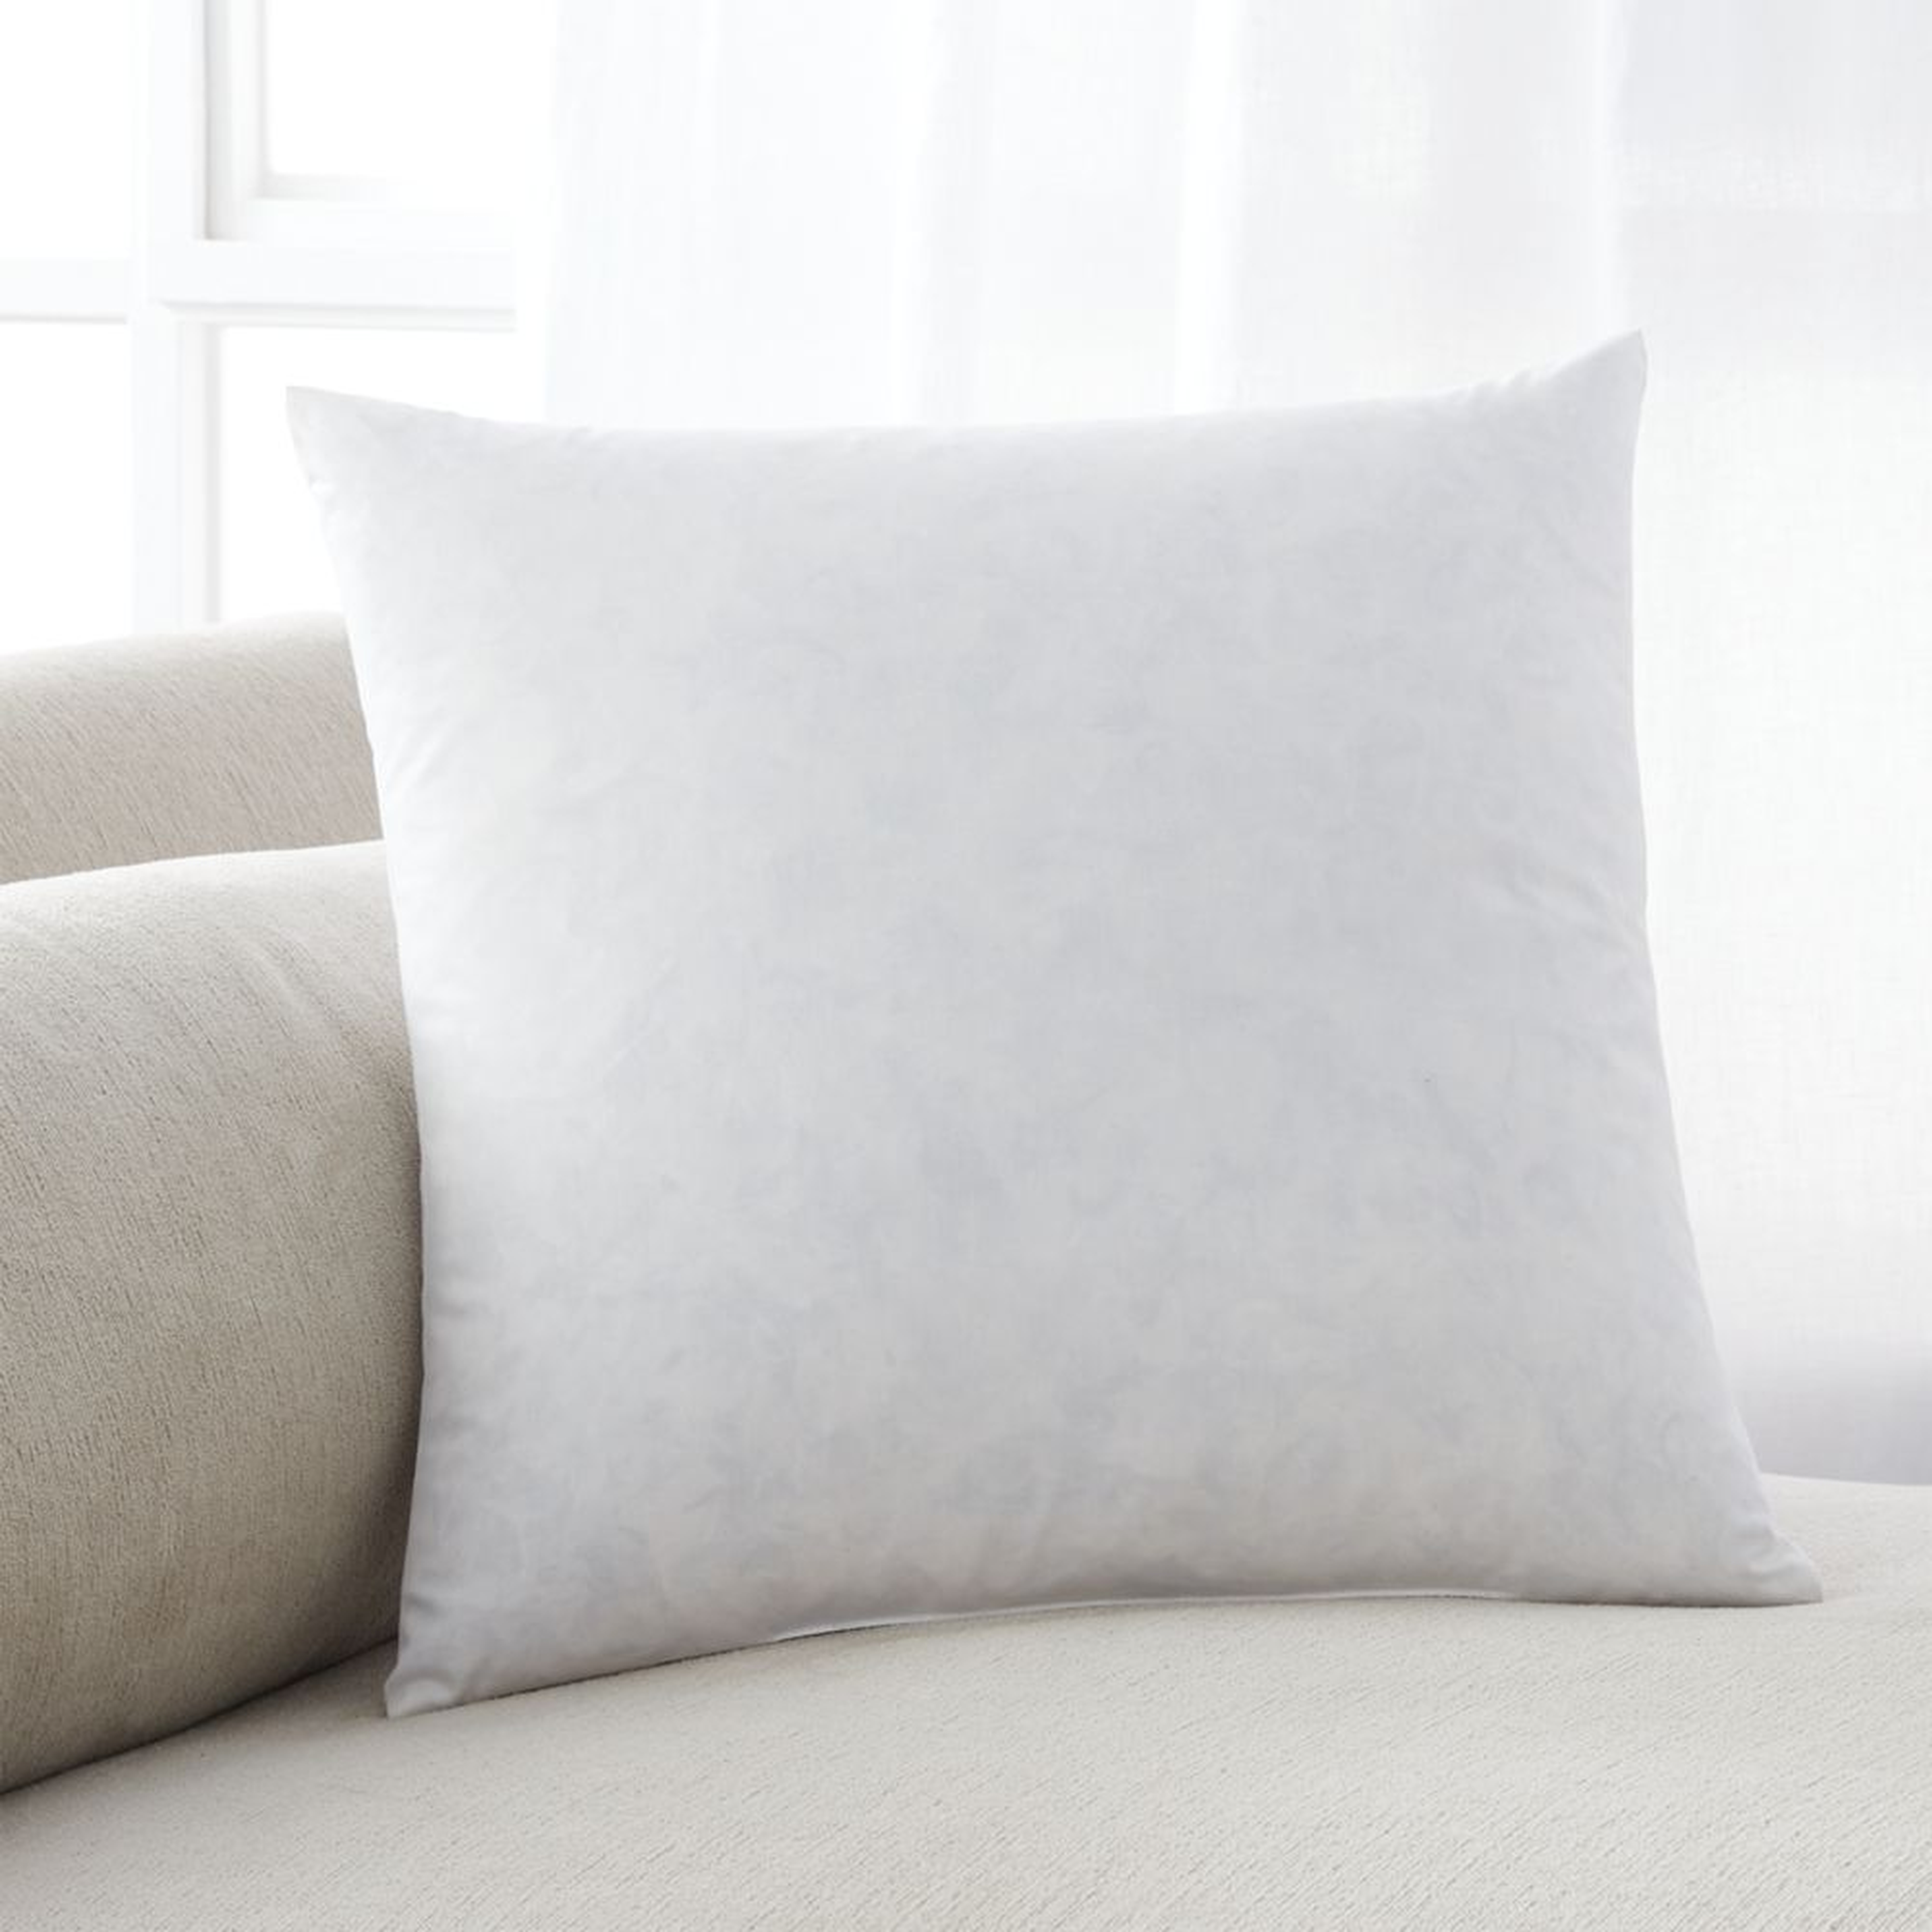 Feather 16" Pillow Insert - Crate and Barrel